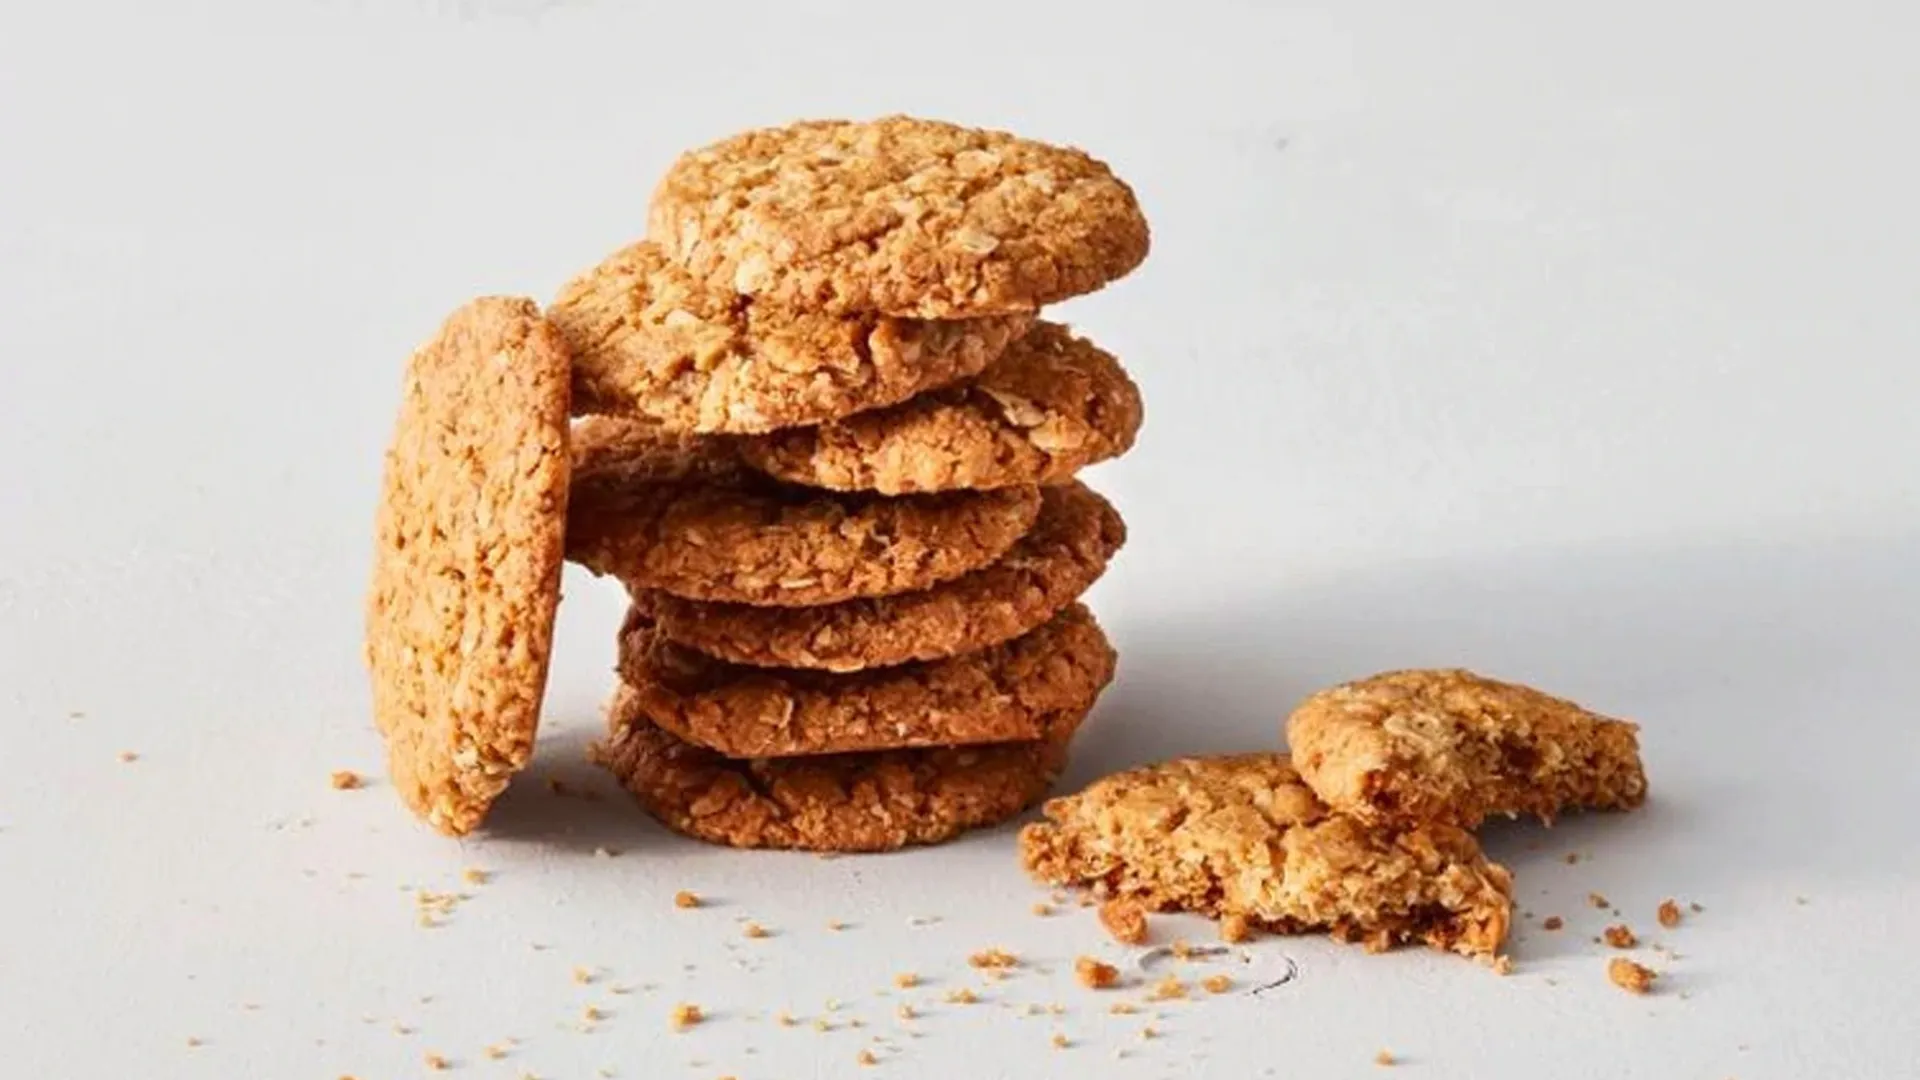 ANZAC Biscuits (As defined by the Australian Government)